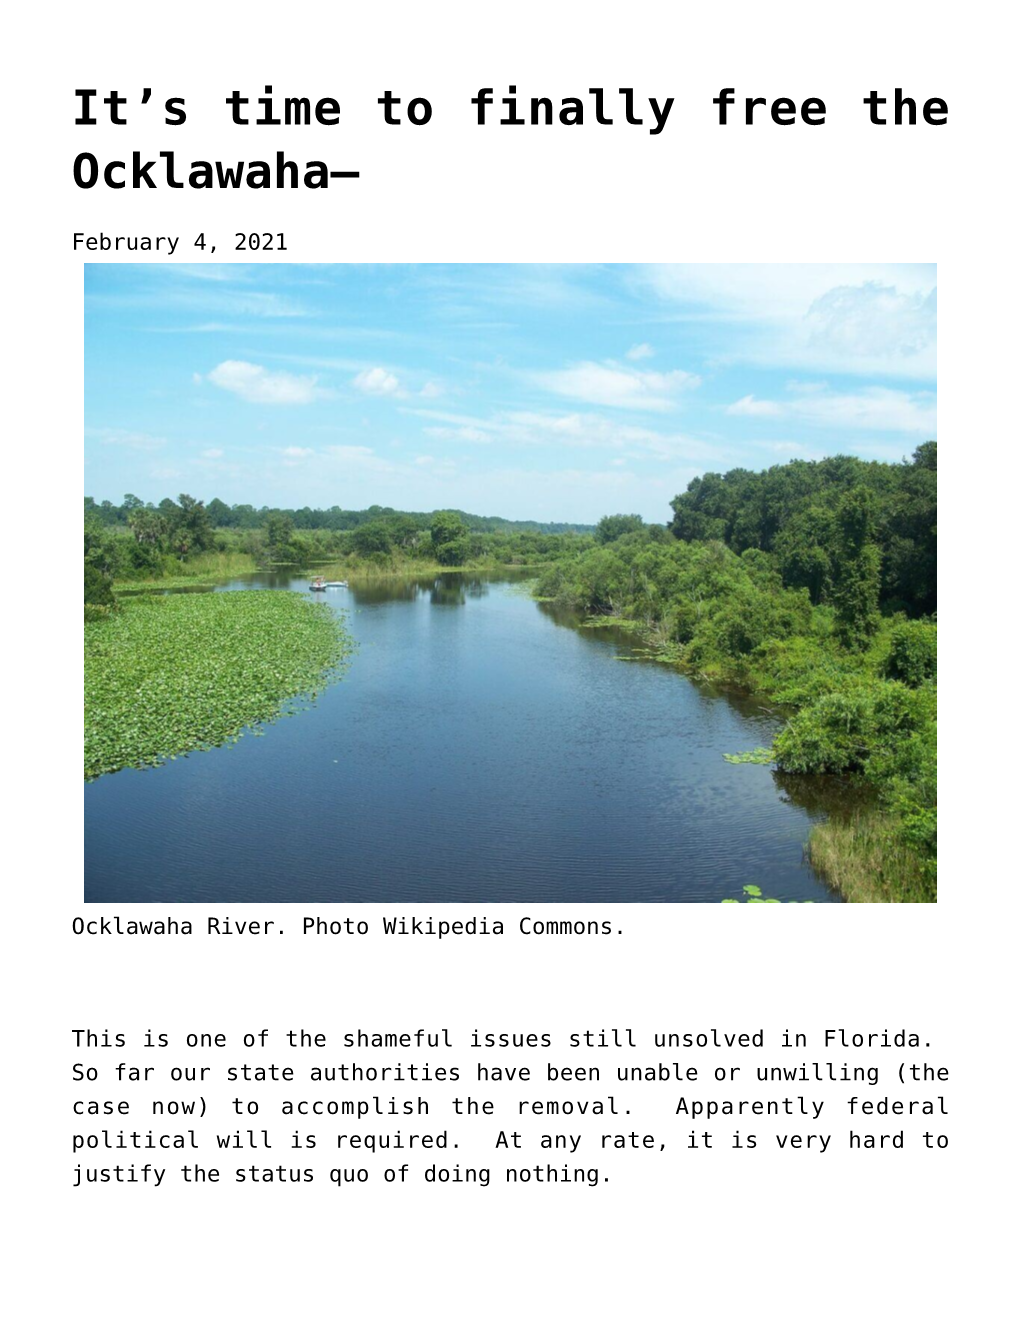 It's Time to Finally Free the Ocklawaha&